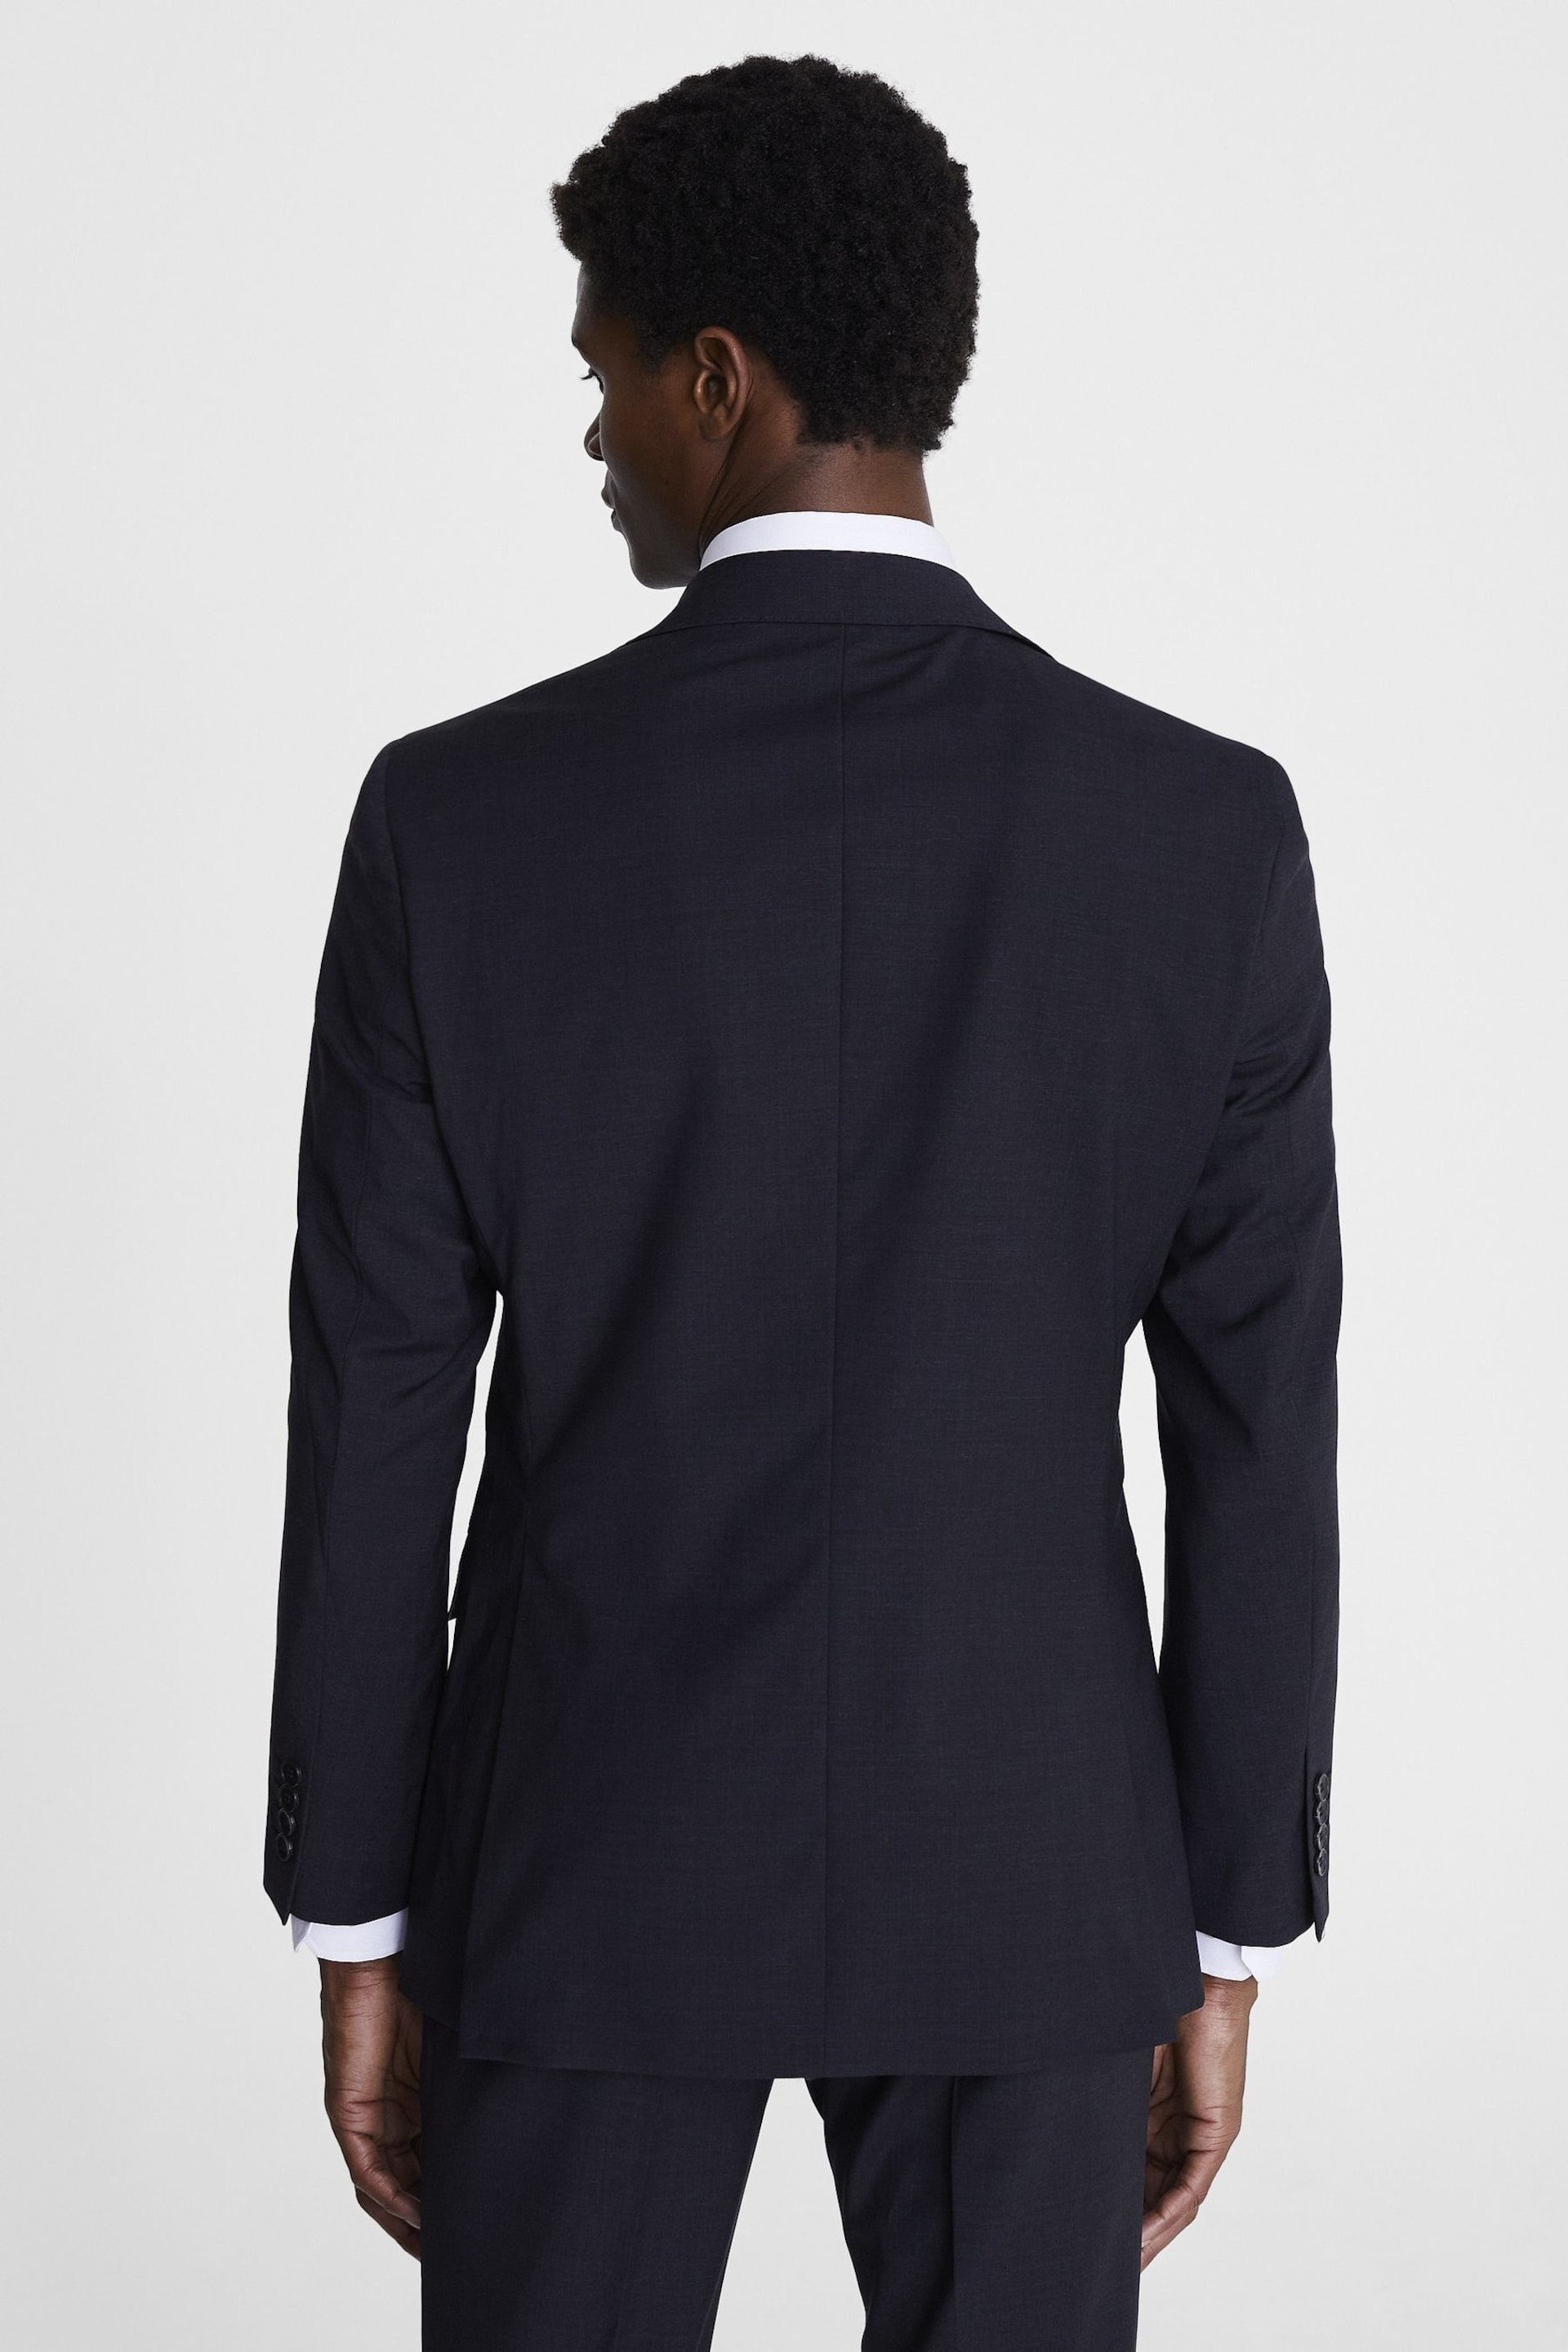 MOSS Charcoal Grey Tailored Fit Performance Suit Jacket - Image 3 of 7